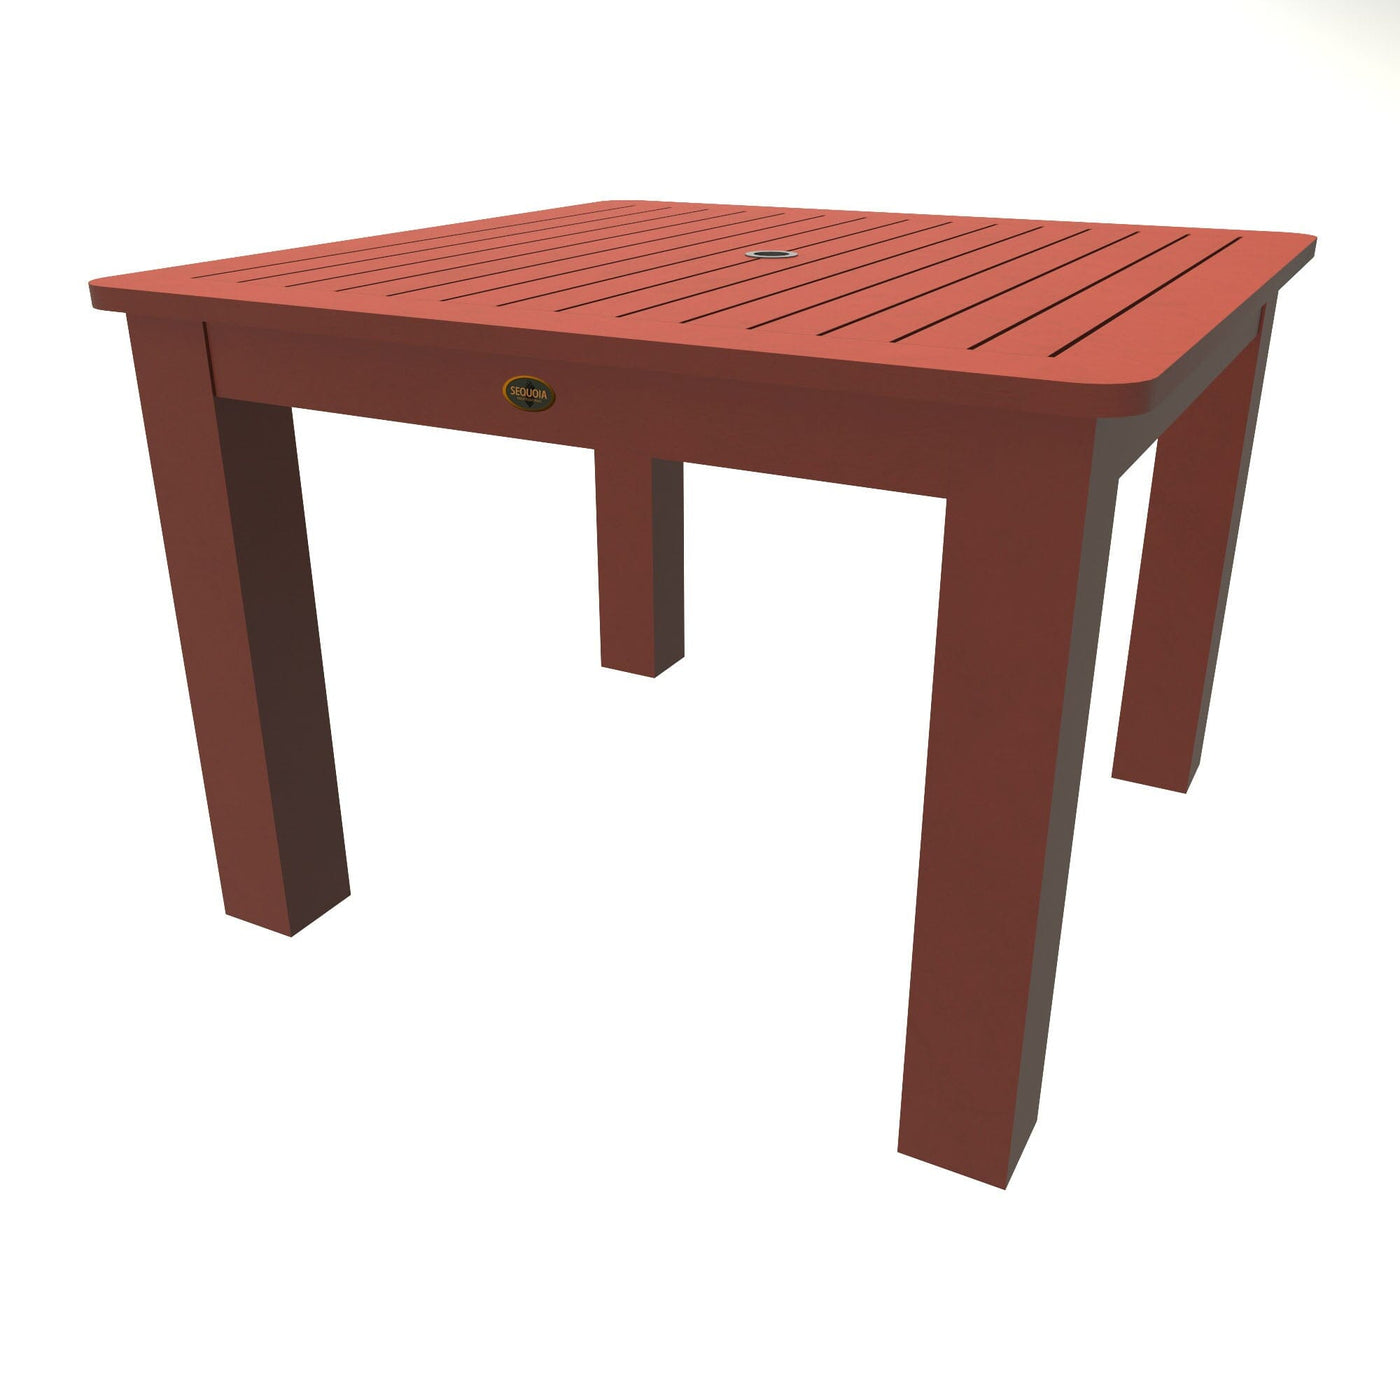 Square 42x42 Dining Table Dining Sequoia Professional Rustic Red 